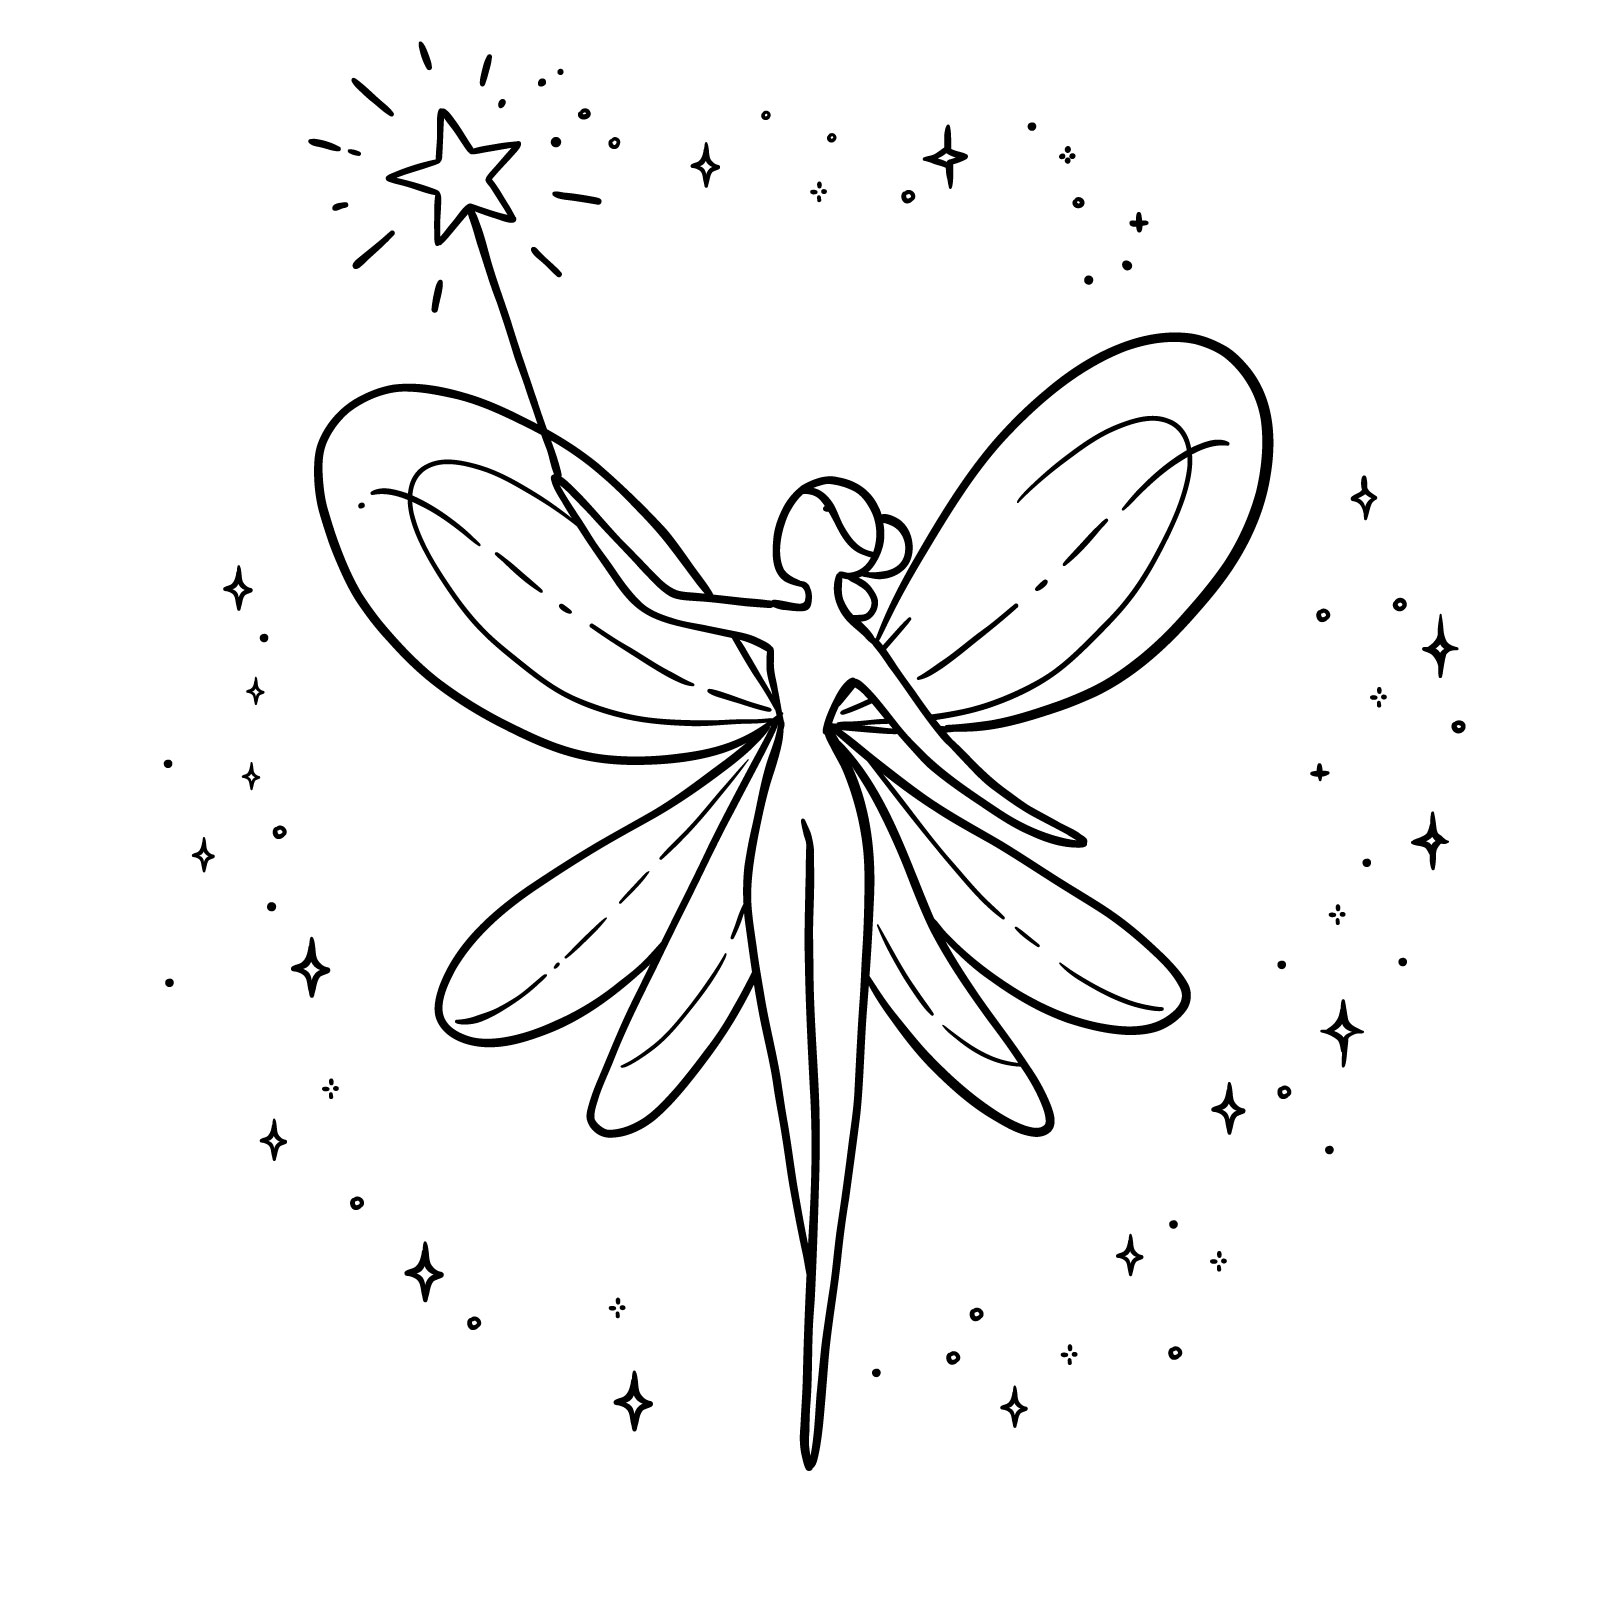 Completed simple fairy drawing - final step